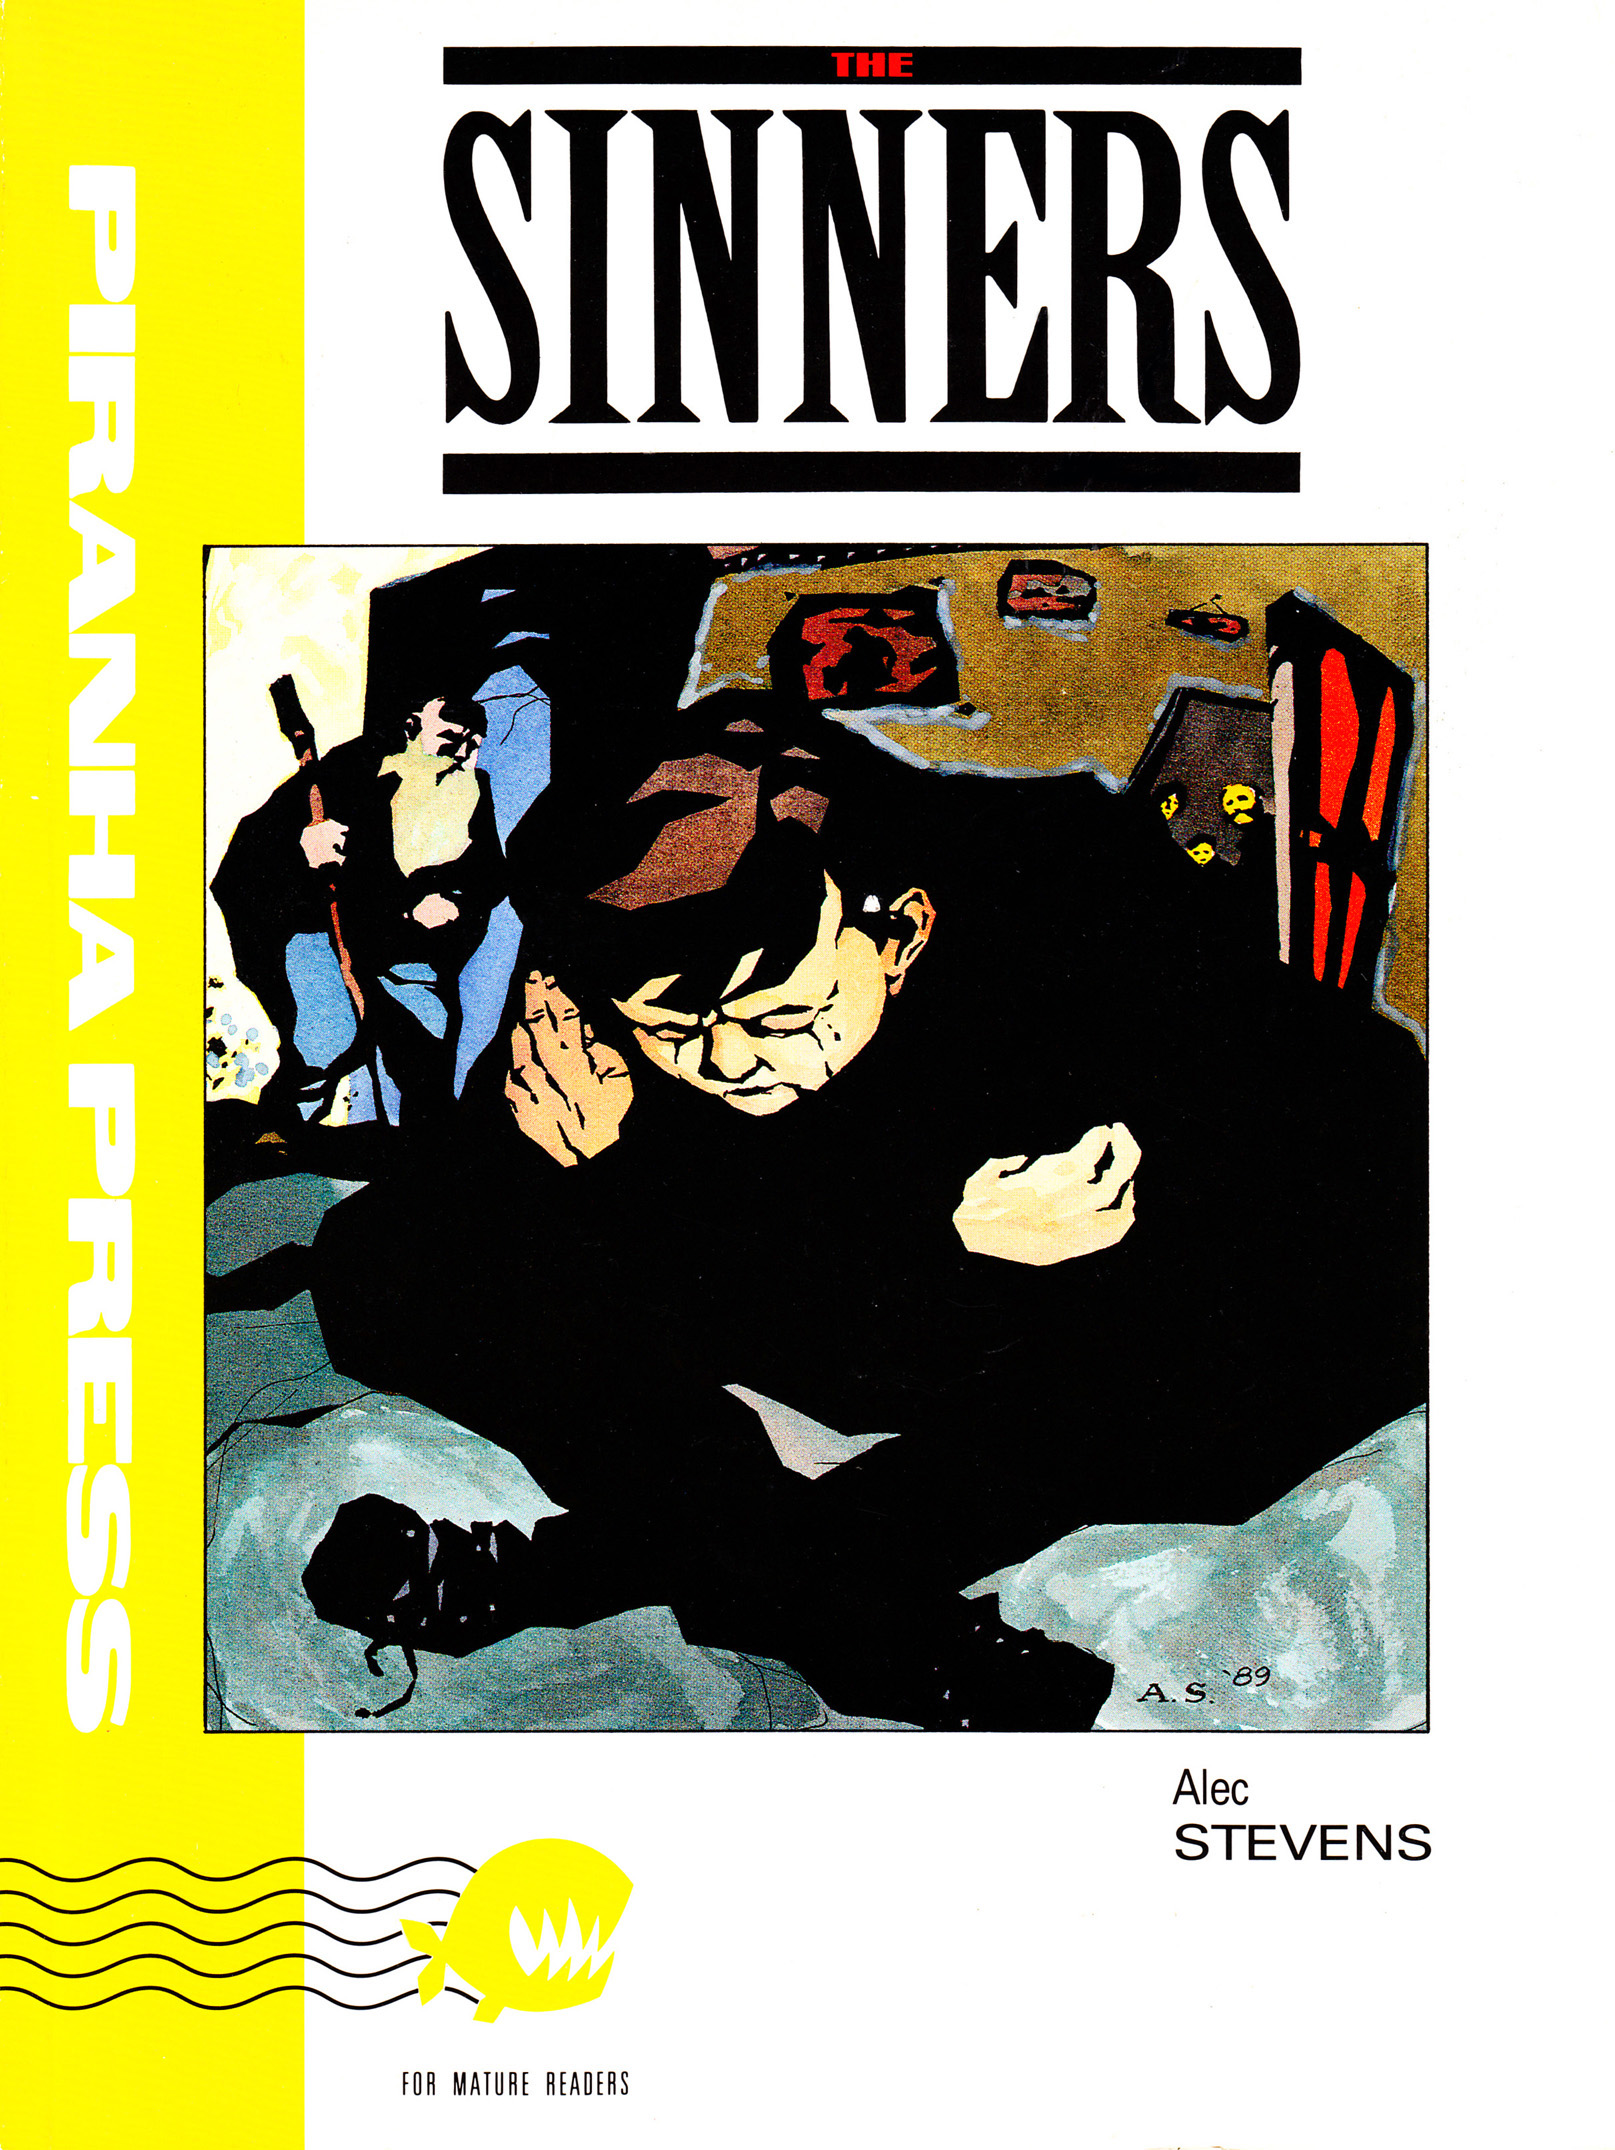 Read online The Sinners comic -  Issue # Full - 1